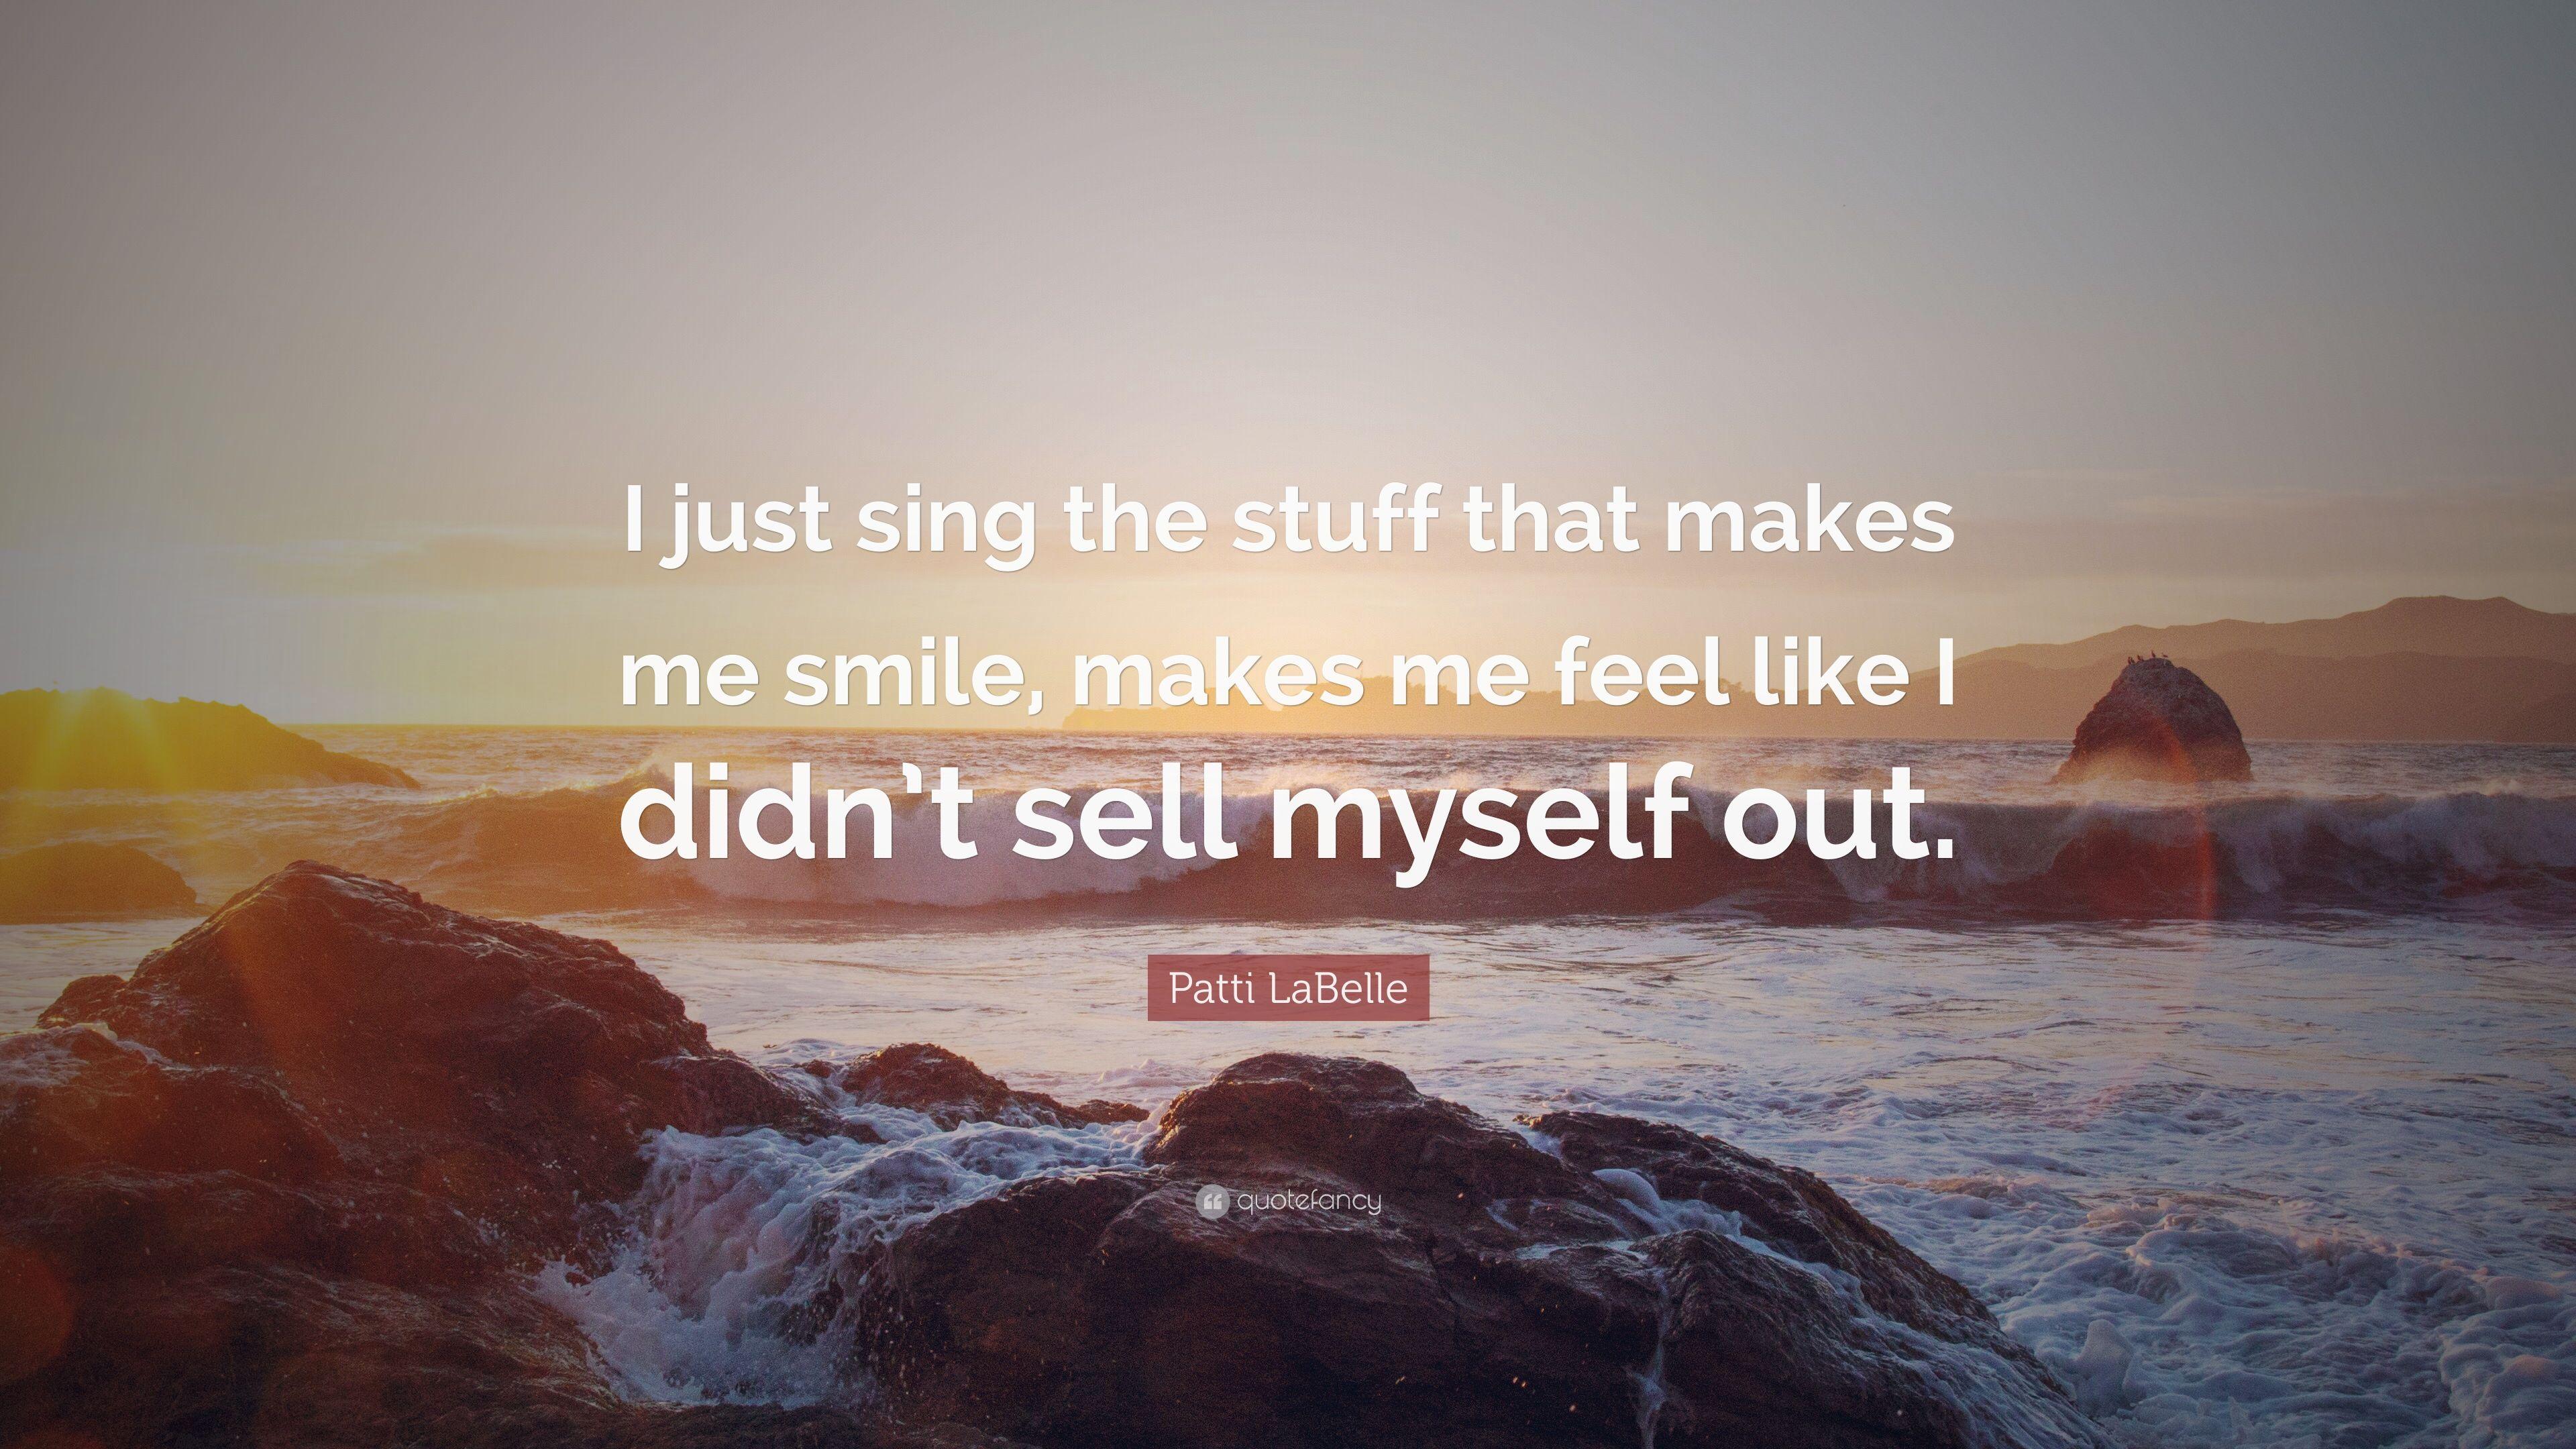 Patti LaBelle Quote: “I just sing the stuff that makes me smile